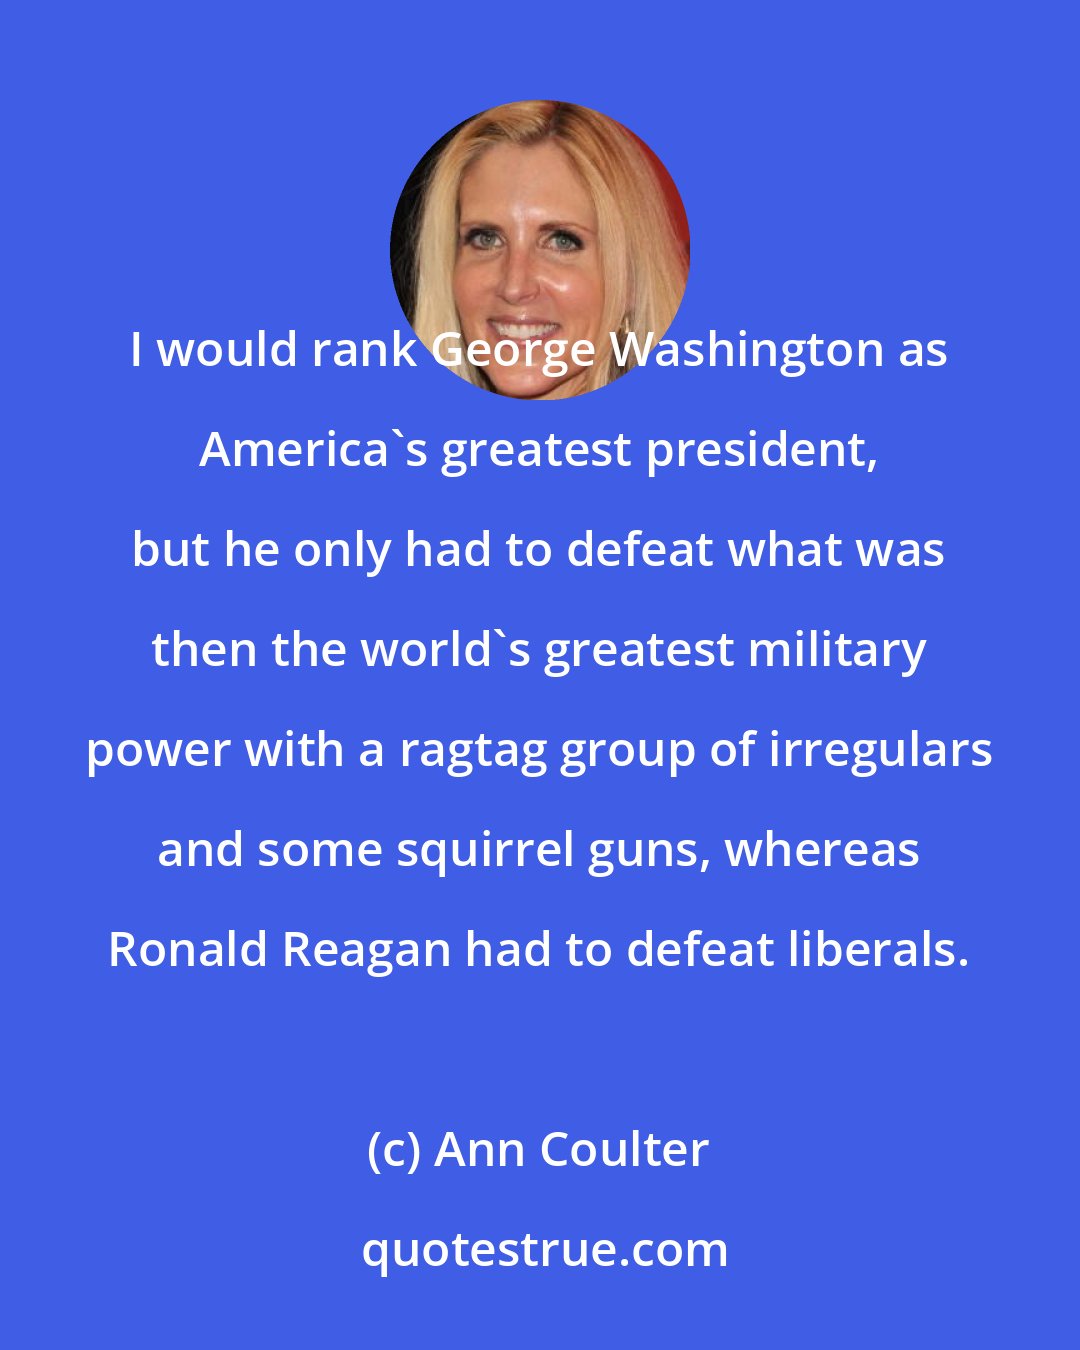 Ann Coulter: I would rank George Washington as America's greatest president, but he only had to defeat what was then the world's greatest military power with a ragtag group of irregulars and some squirrel guns, whereas Ronald Reagan had to defeat liberals.